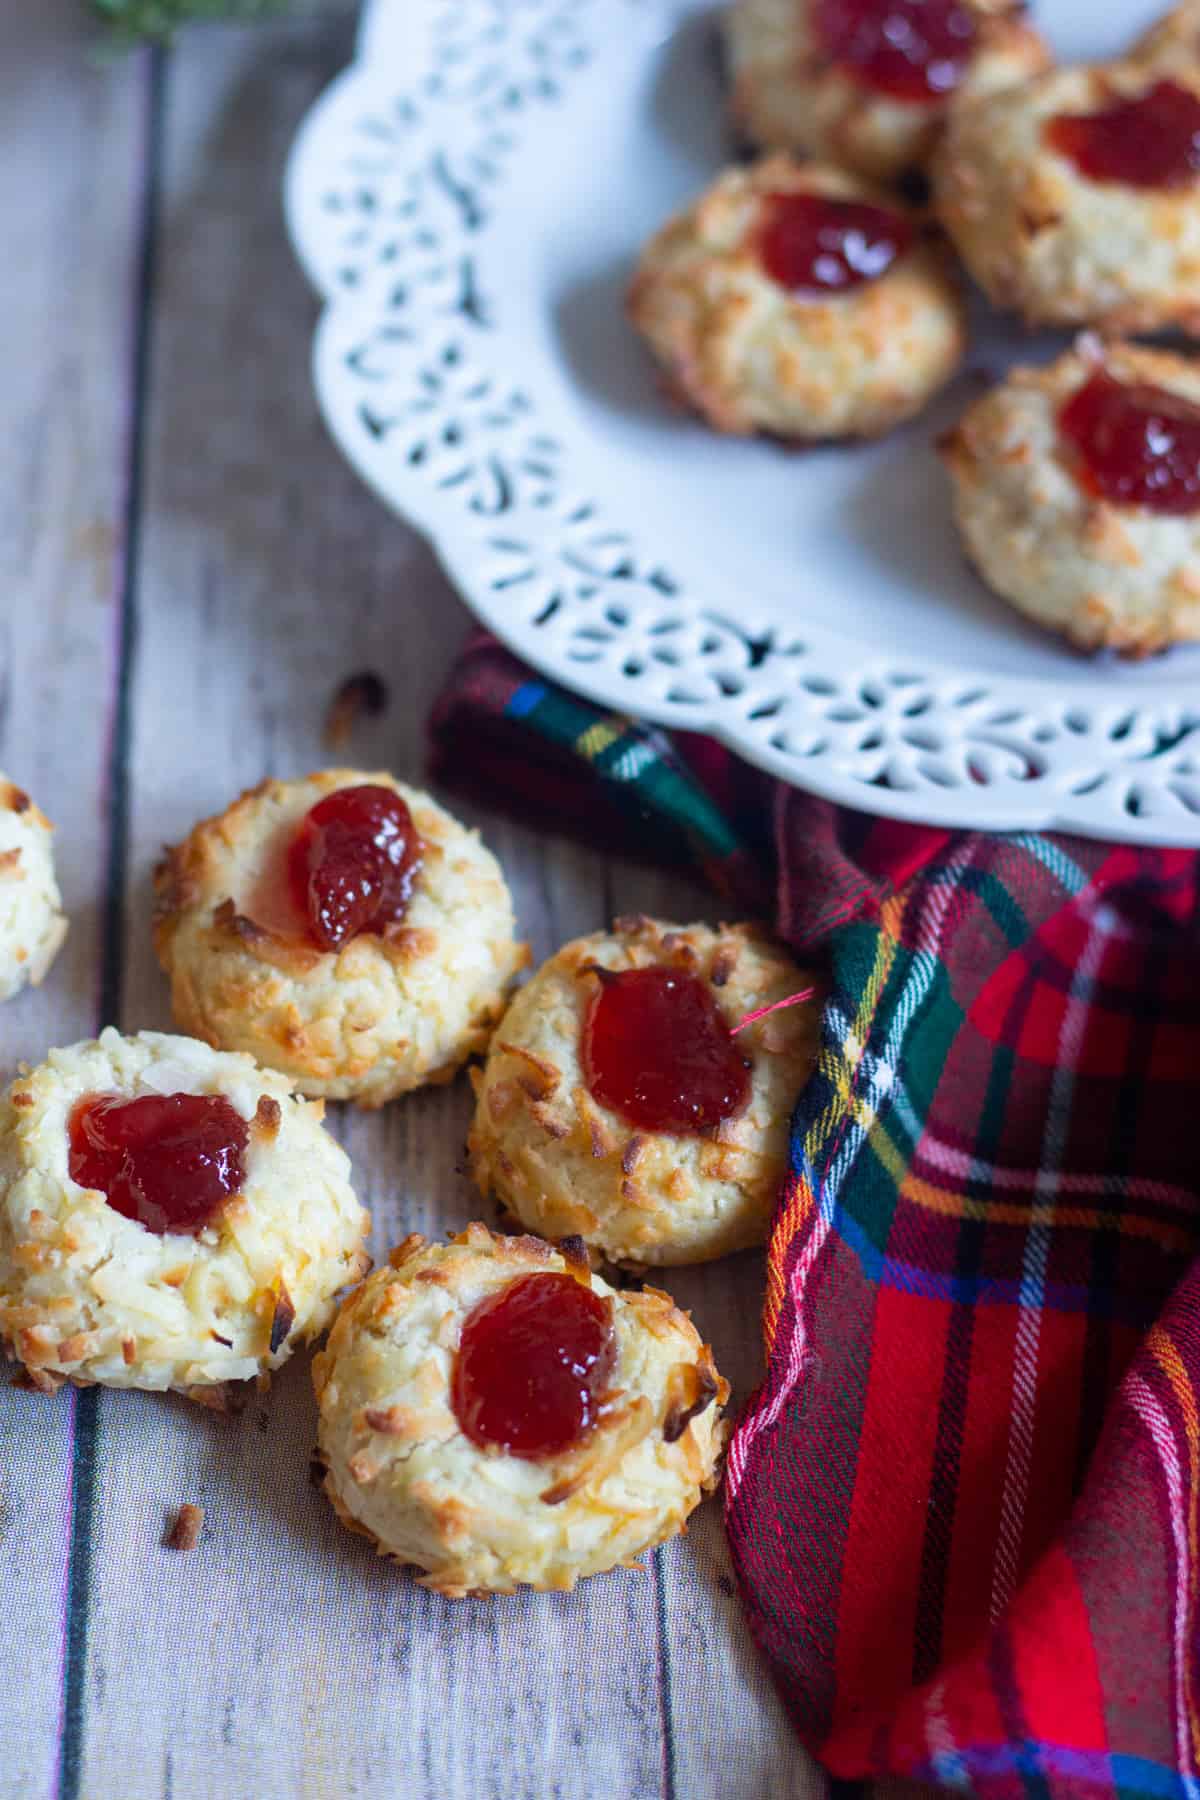 jam cookies are simple classic cookies. The addition of coconut flakes bring more flavor to these cookies. 